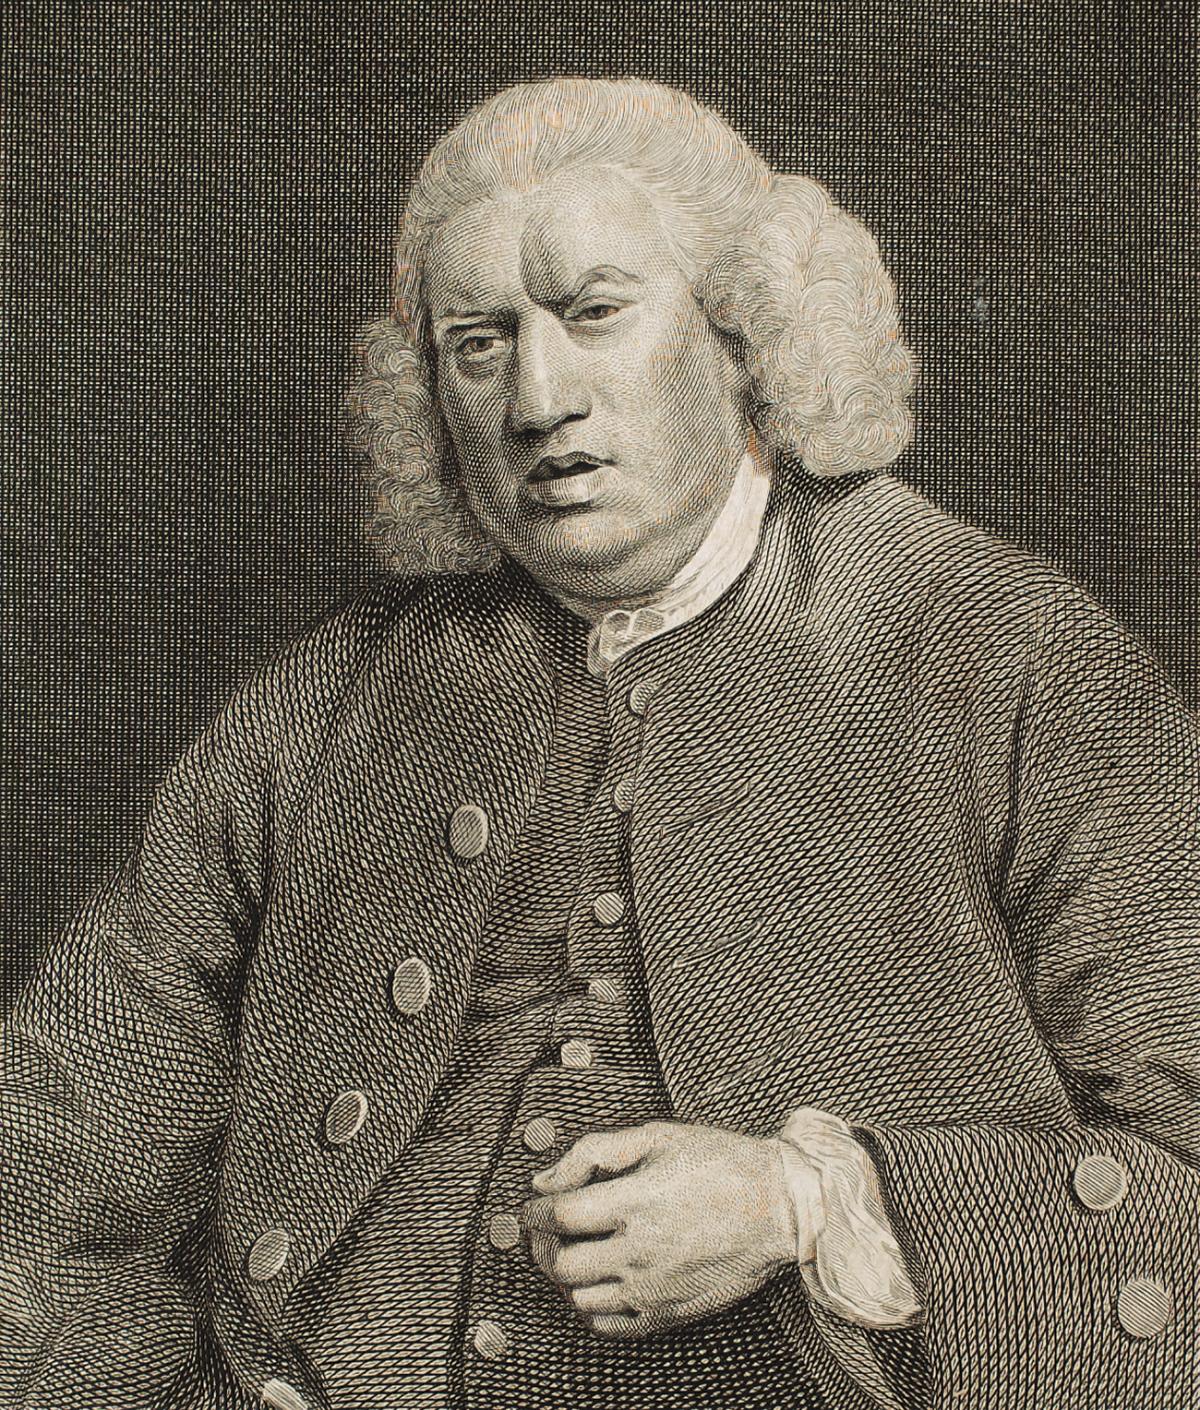 Johnson in a buttoned waistcoat and jacket, left hand held below his chest, mouth slightly open and frowning, not looking at the viewer